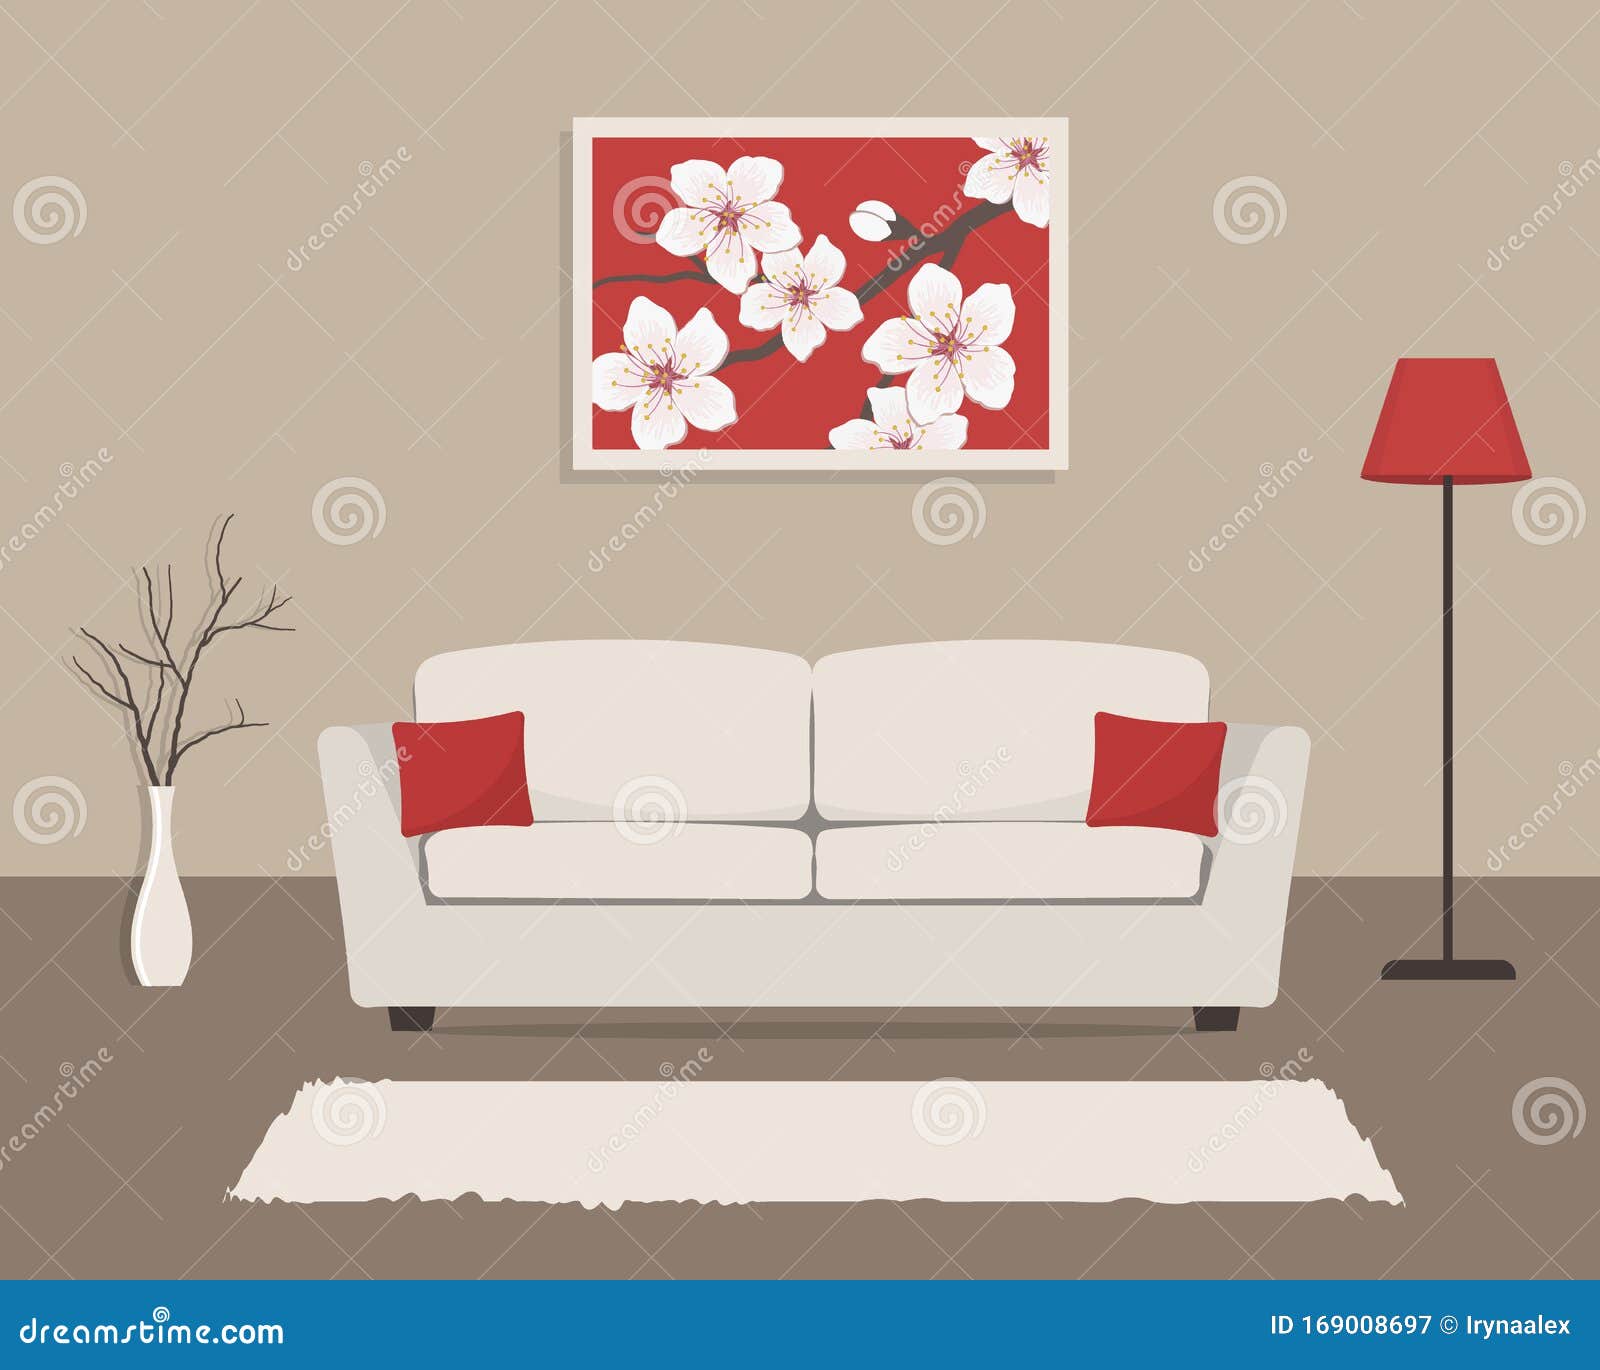 Living Room Interior In Red And Beige Colors There Is A Sofa With